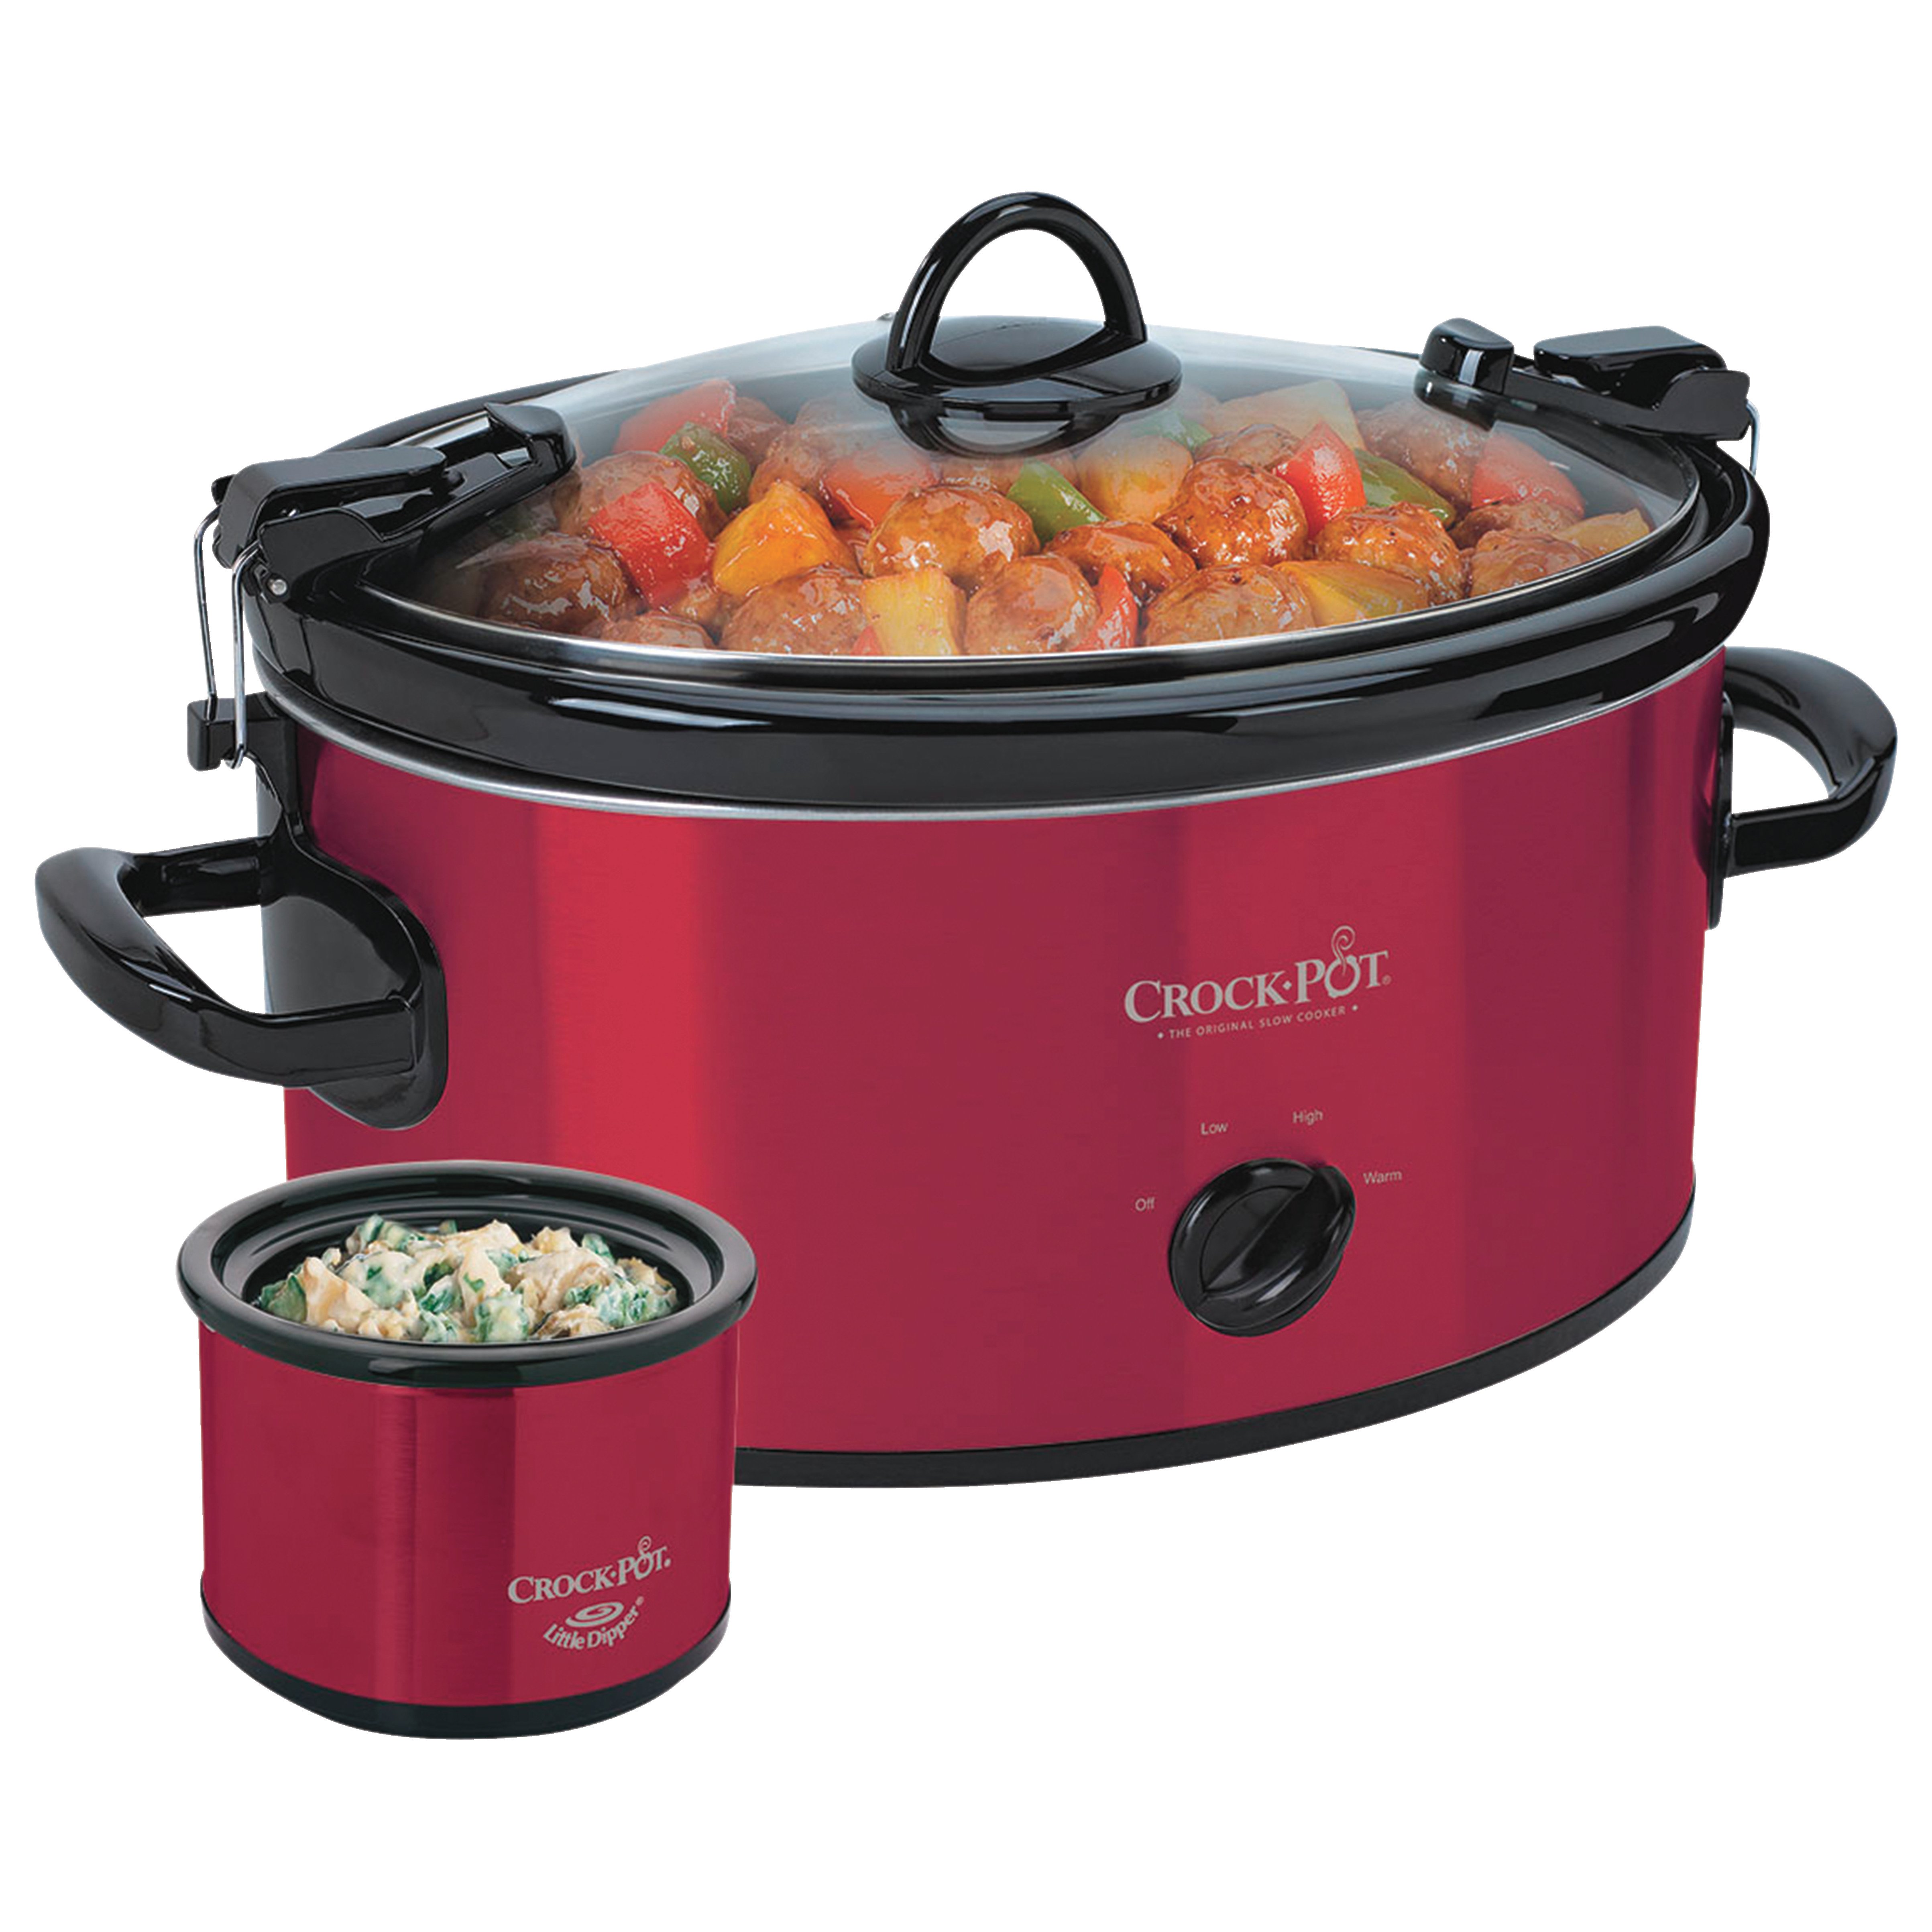 Crock-Pot Red Cook & Carry Slow Cooker Set with Warmer - Shop